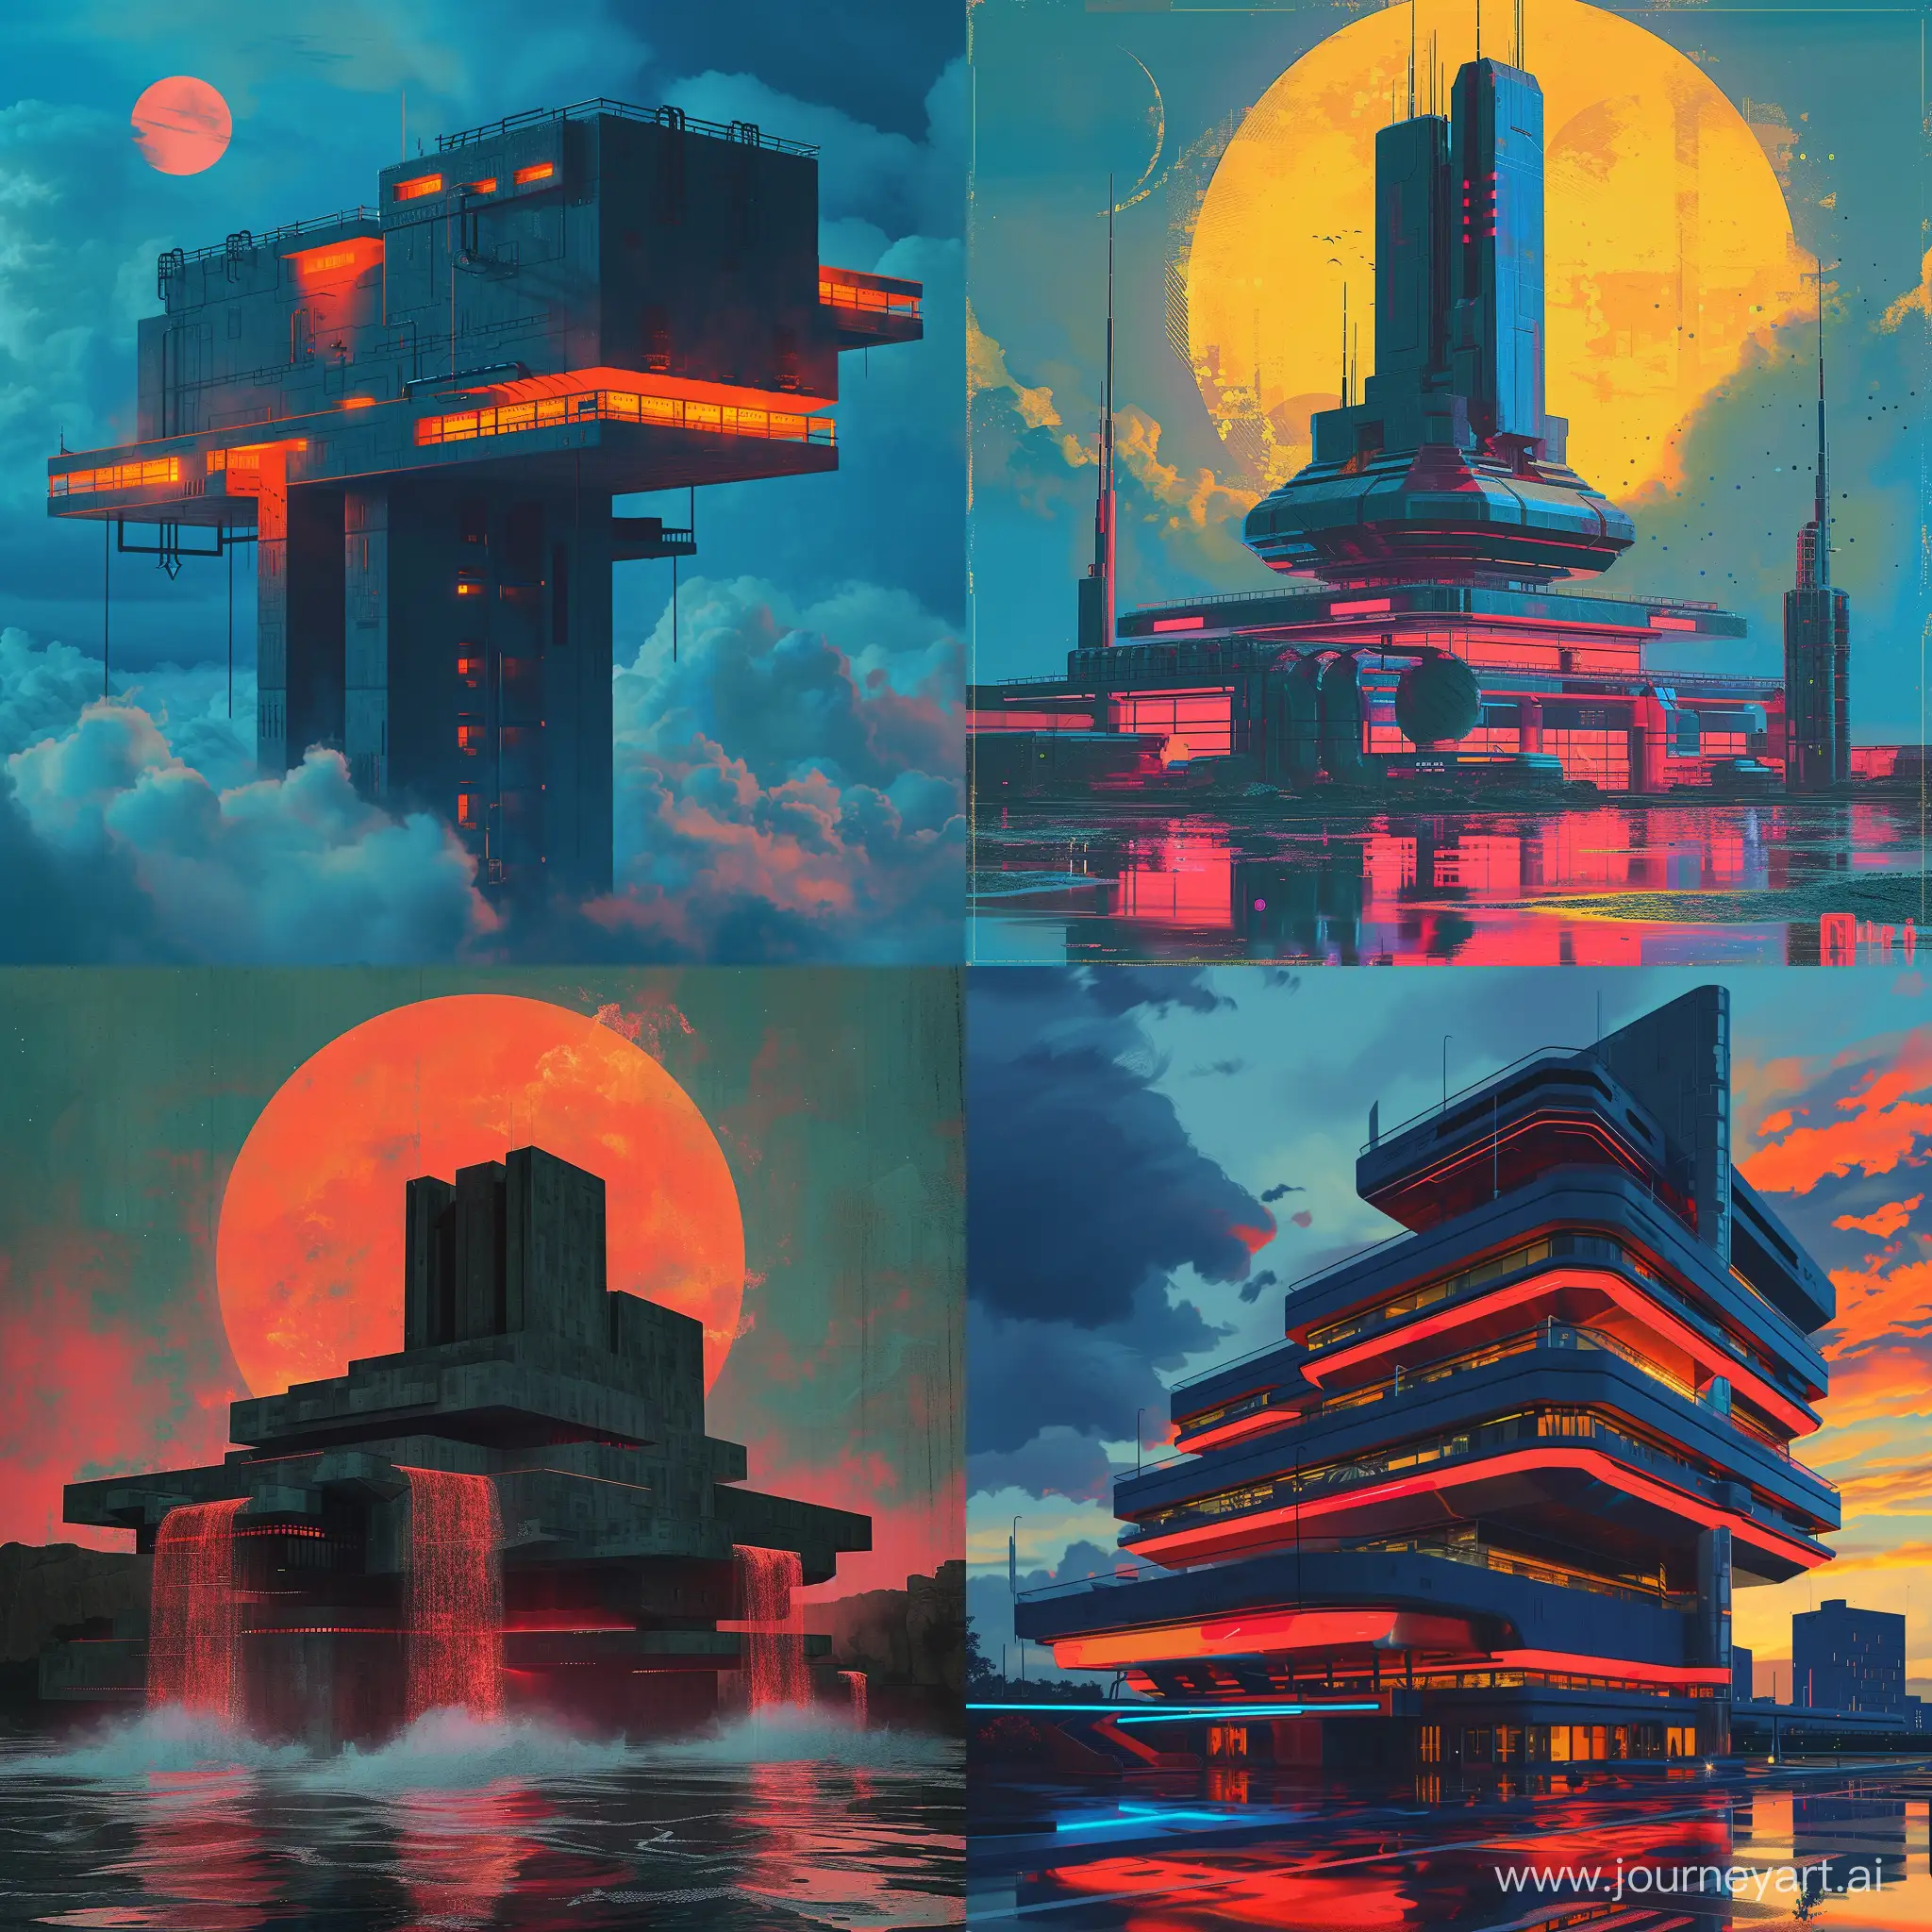 Mysterious-Retro-Futuristic-Cold-War-Era-Building-Synthwave-Digital-Painting